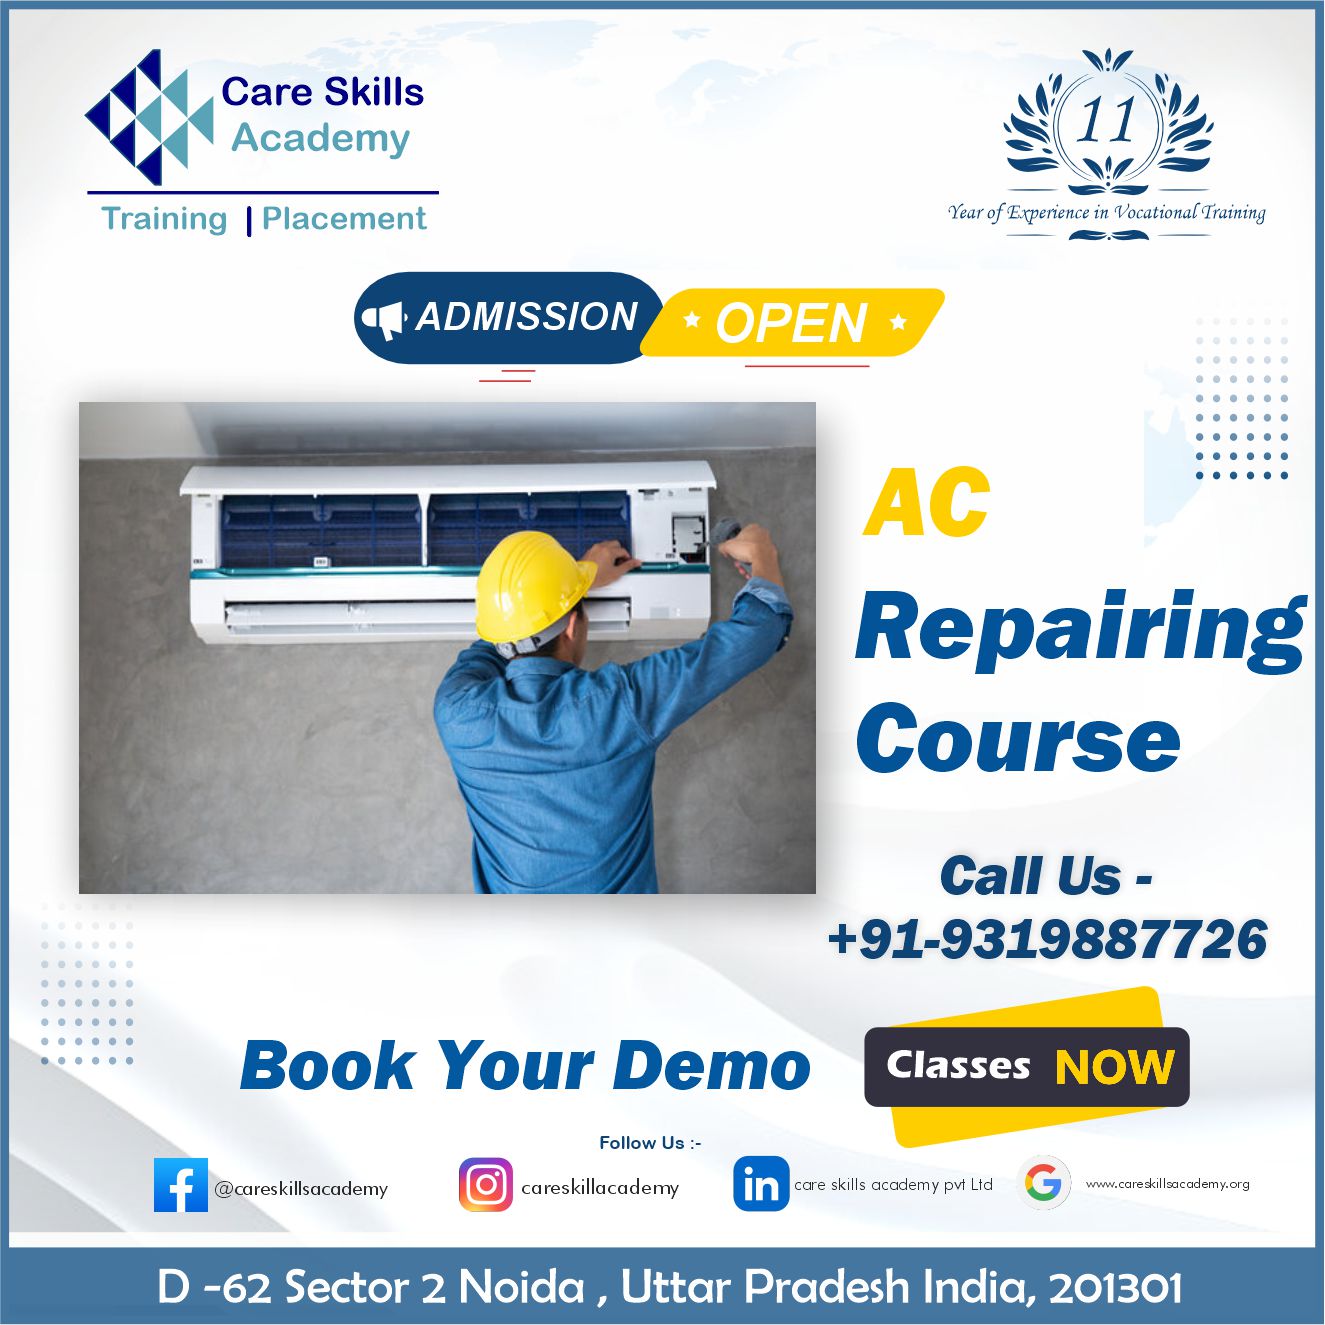 Discover AC Repairing Courses Near You at Care Skills Academy